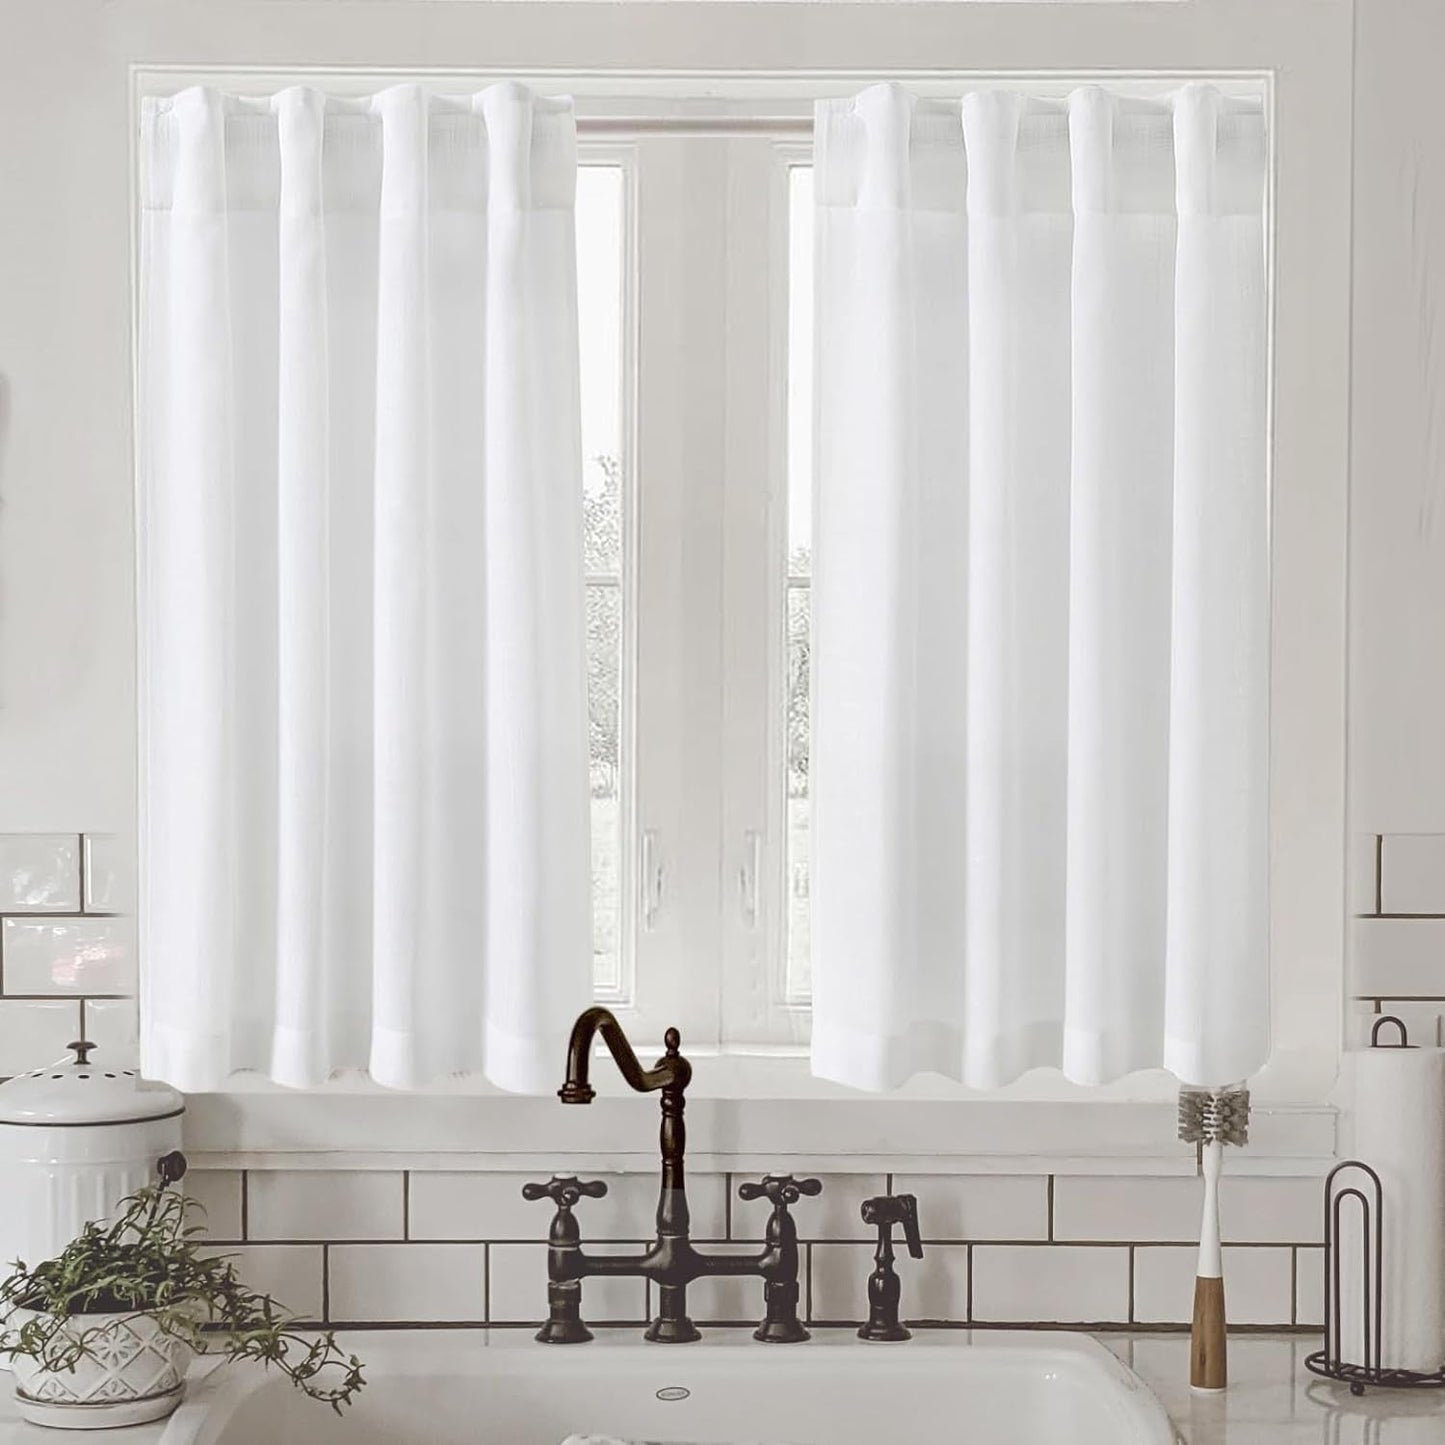 Farmhouse Kitchen Window Curtains over Sink 36 Inch Length Cafe Curtain 2 Panel Set Neutral Small Window Treatment Tiers Sheer Curtains for Basement Camper 26Wx36L Nature